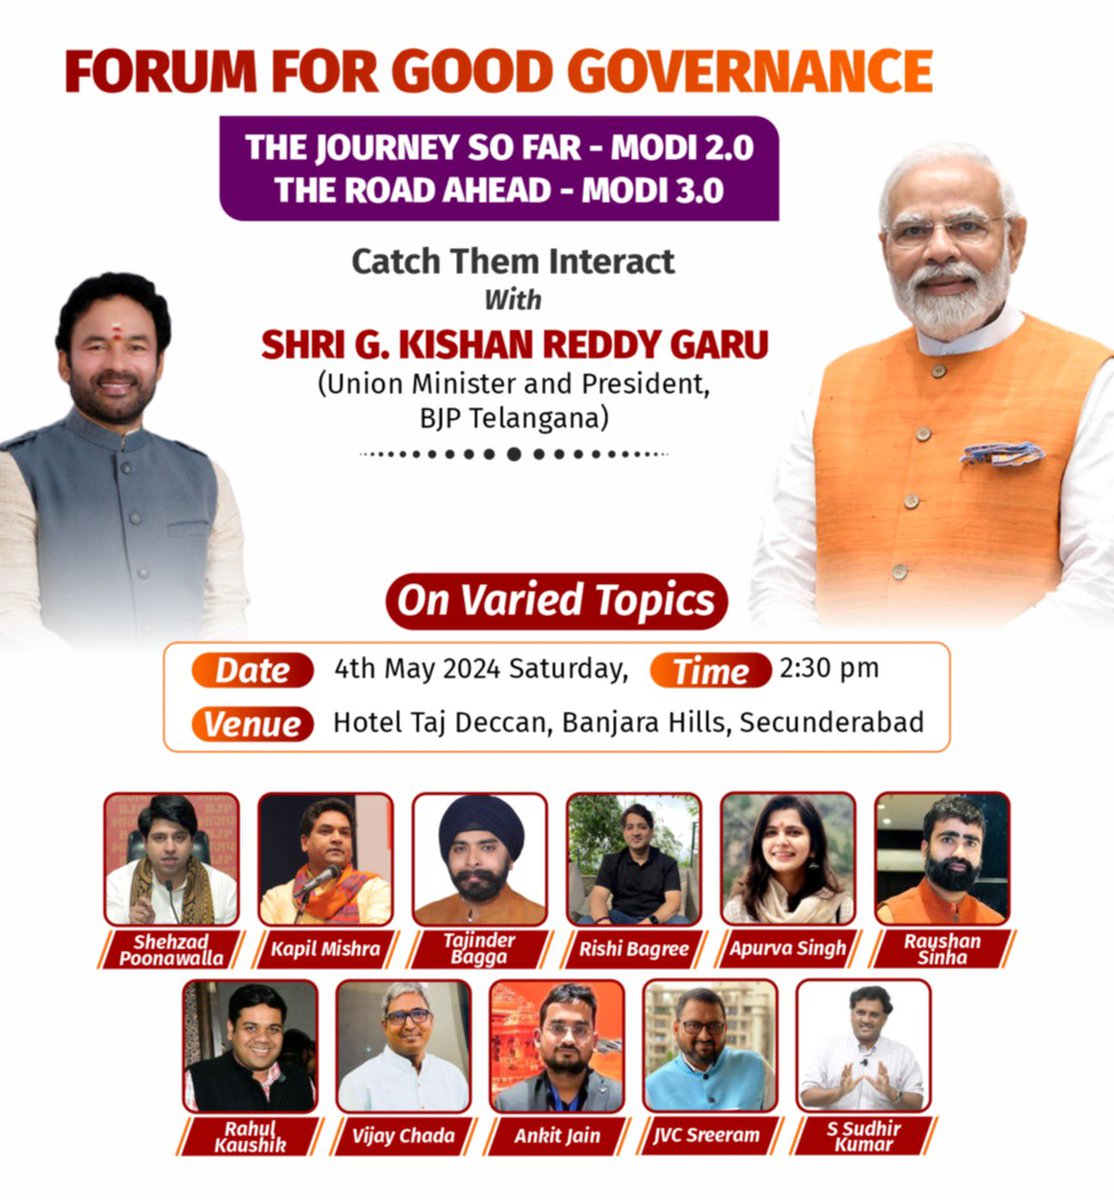 Will be in Bhagyanagar, Telangana tomorrow 4th May 2024 Will be attending & interacting with Union Minister Shri @KishanReddyBJP at the Forum For Good Governance. Do join